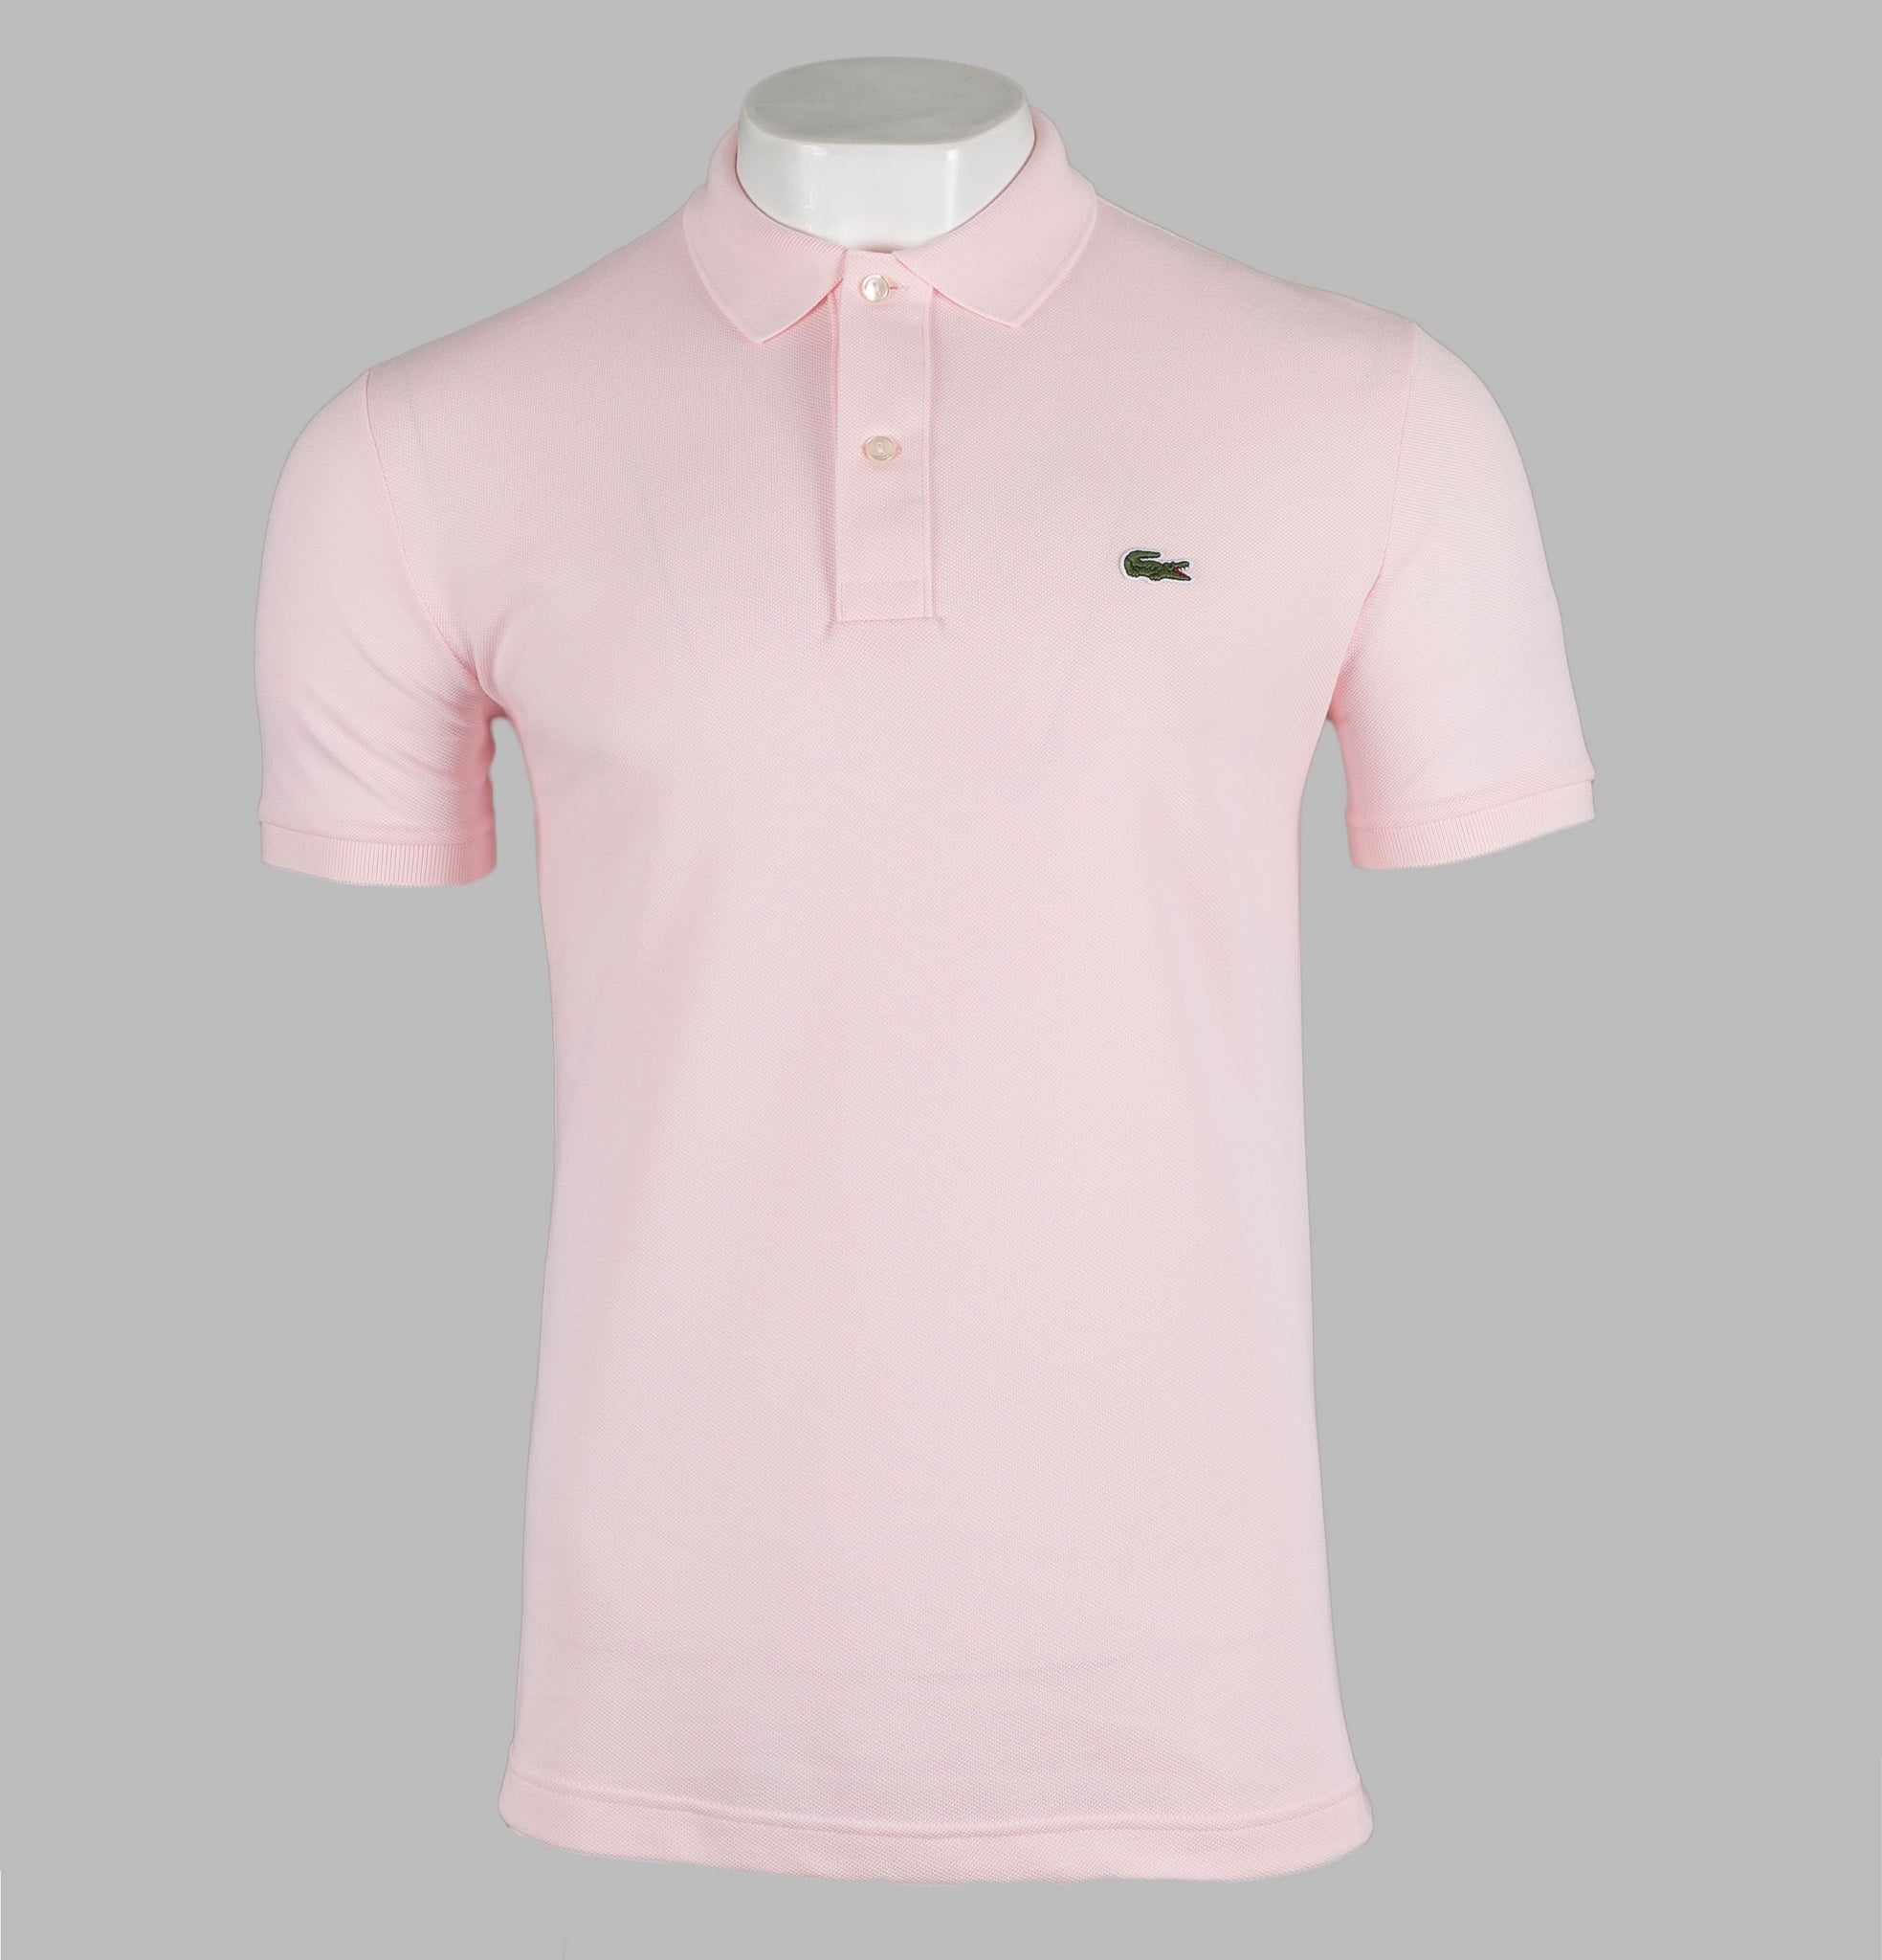 Næb At deaktivere Luksus Lacoste Slim Fit Short Sleeve Polo Shirt Light Pink – Bronx Clothing